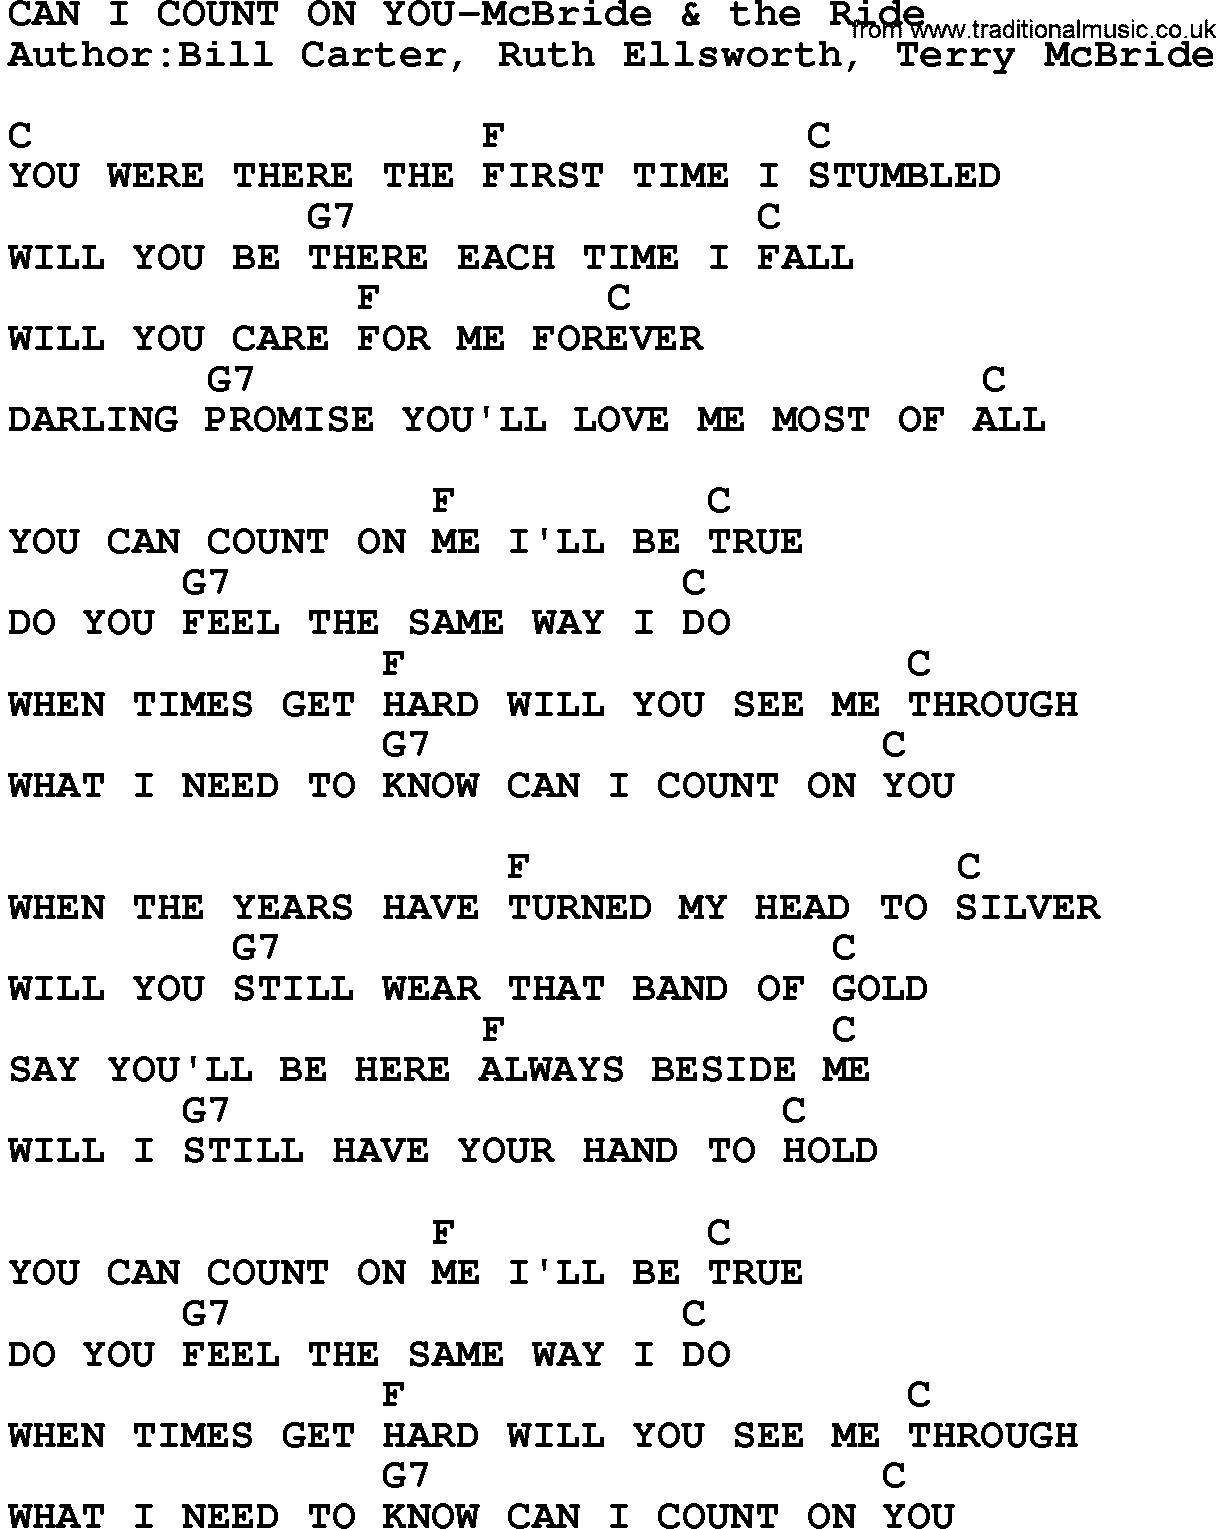 Country music song: Can I Count On You-Mcbride & The Ride lyrics and chords